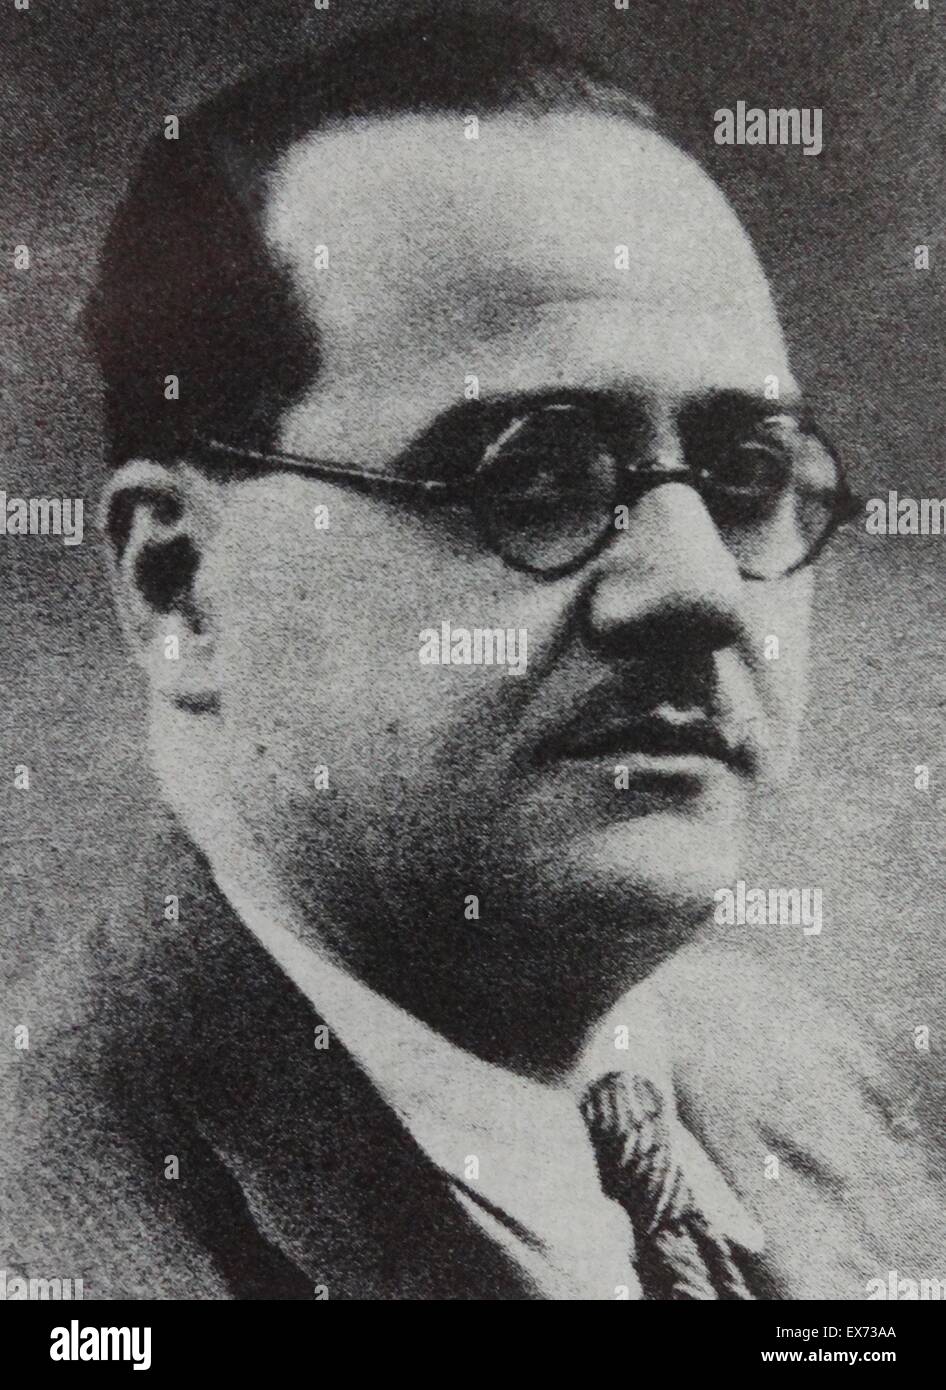 Juan Negrín y López (3 February 1892 – 12 November 1956) was a Spanish politician and physician. He was a leader of the Spanish Socialist Workers' Party (PSOE) and served as finance minister. He was the last Loyalist premier of Spain (1937–39), and presid Stock Photo